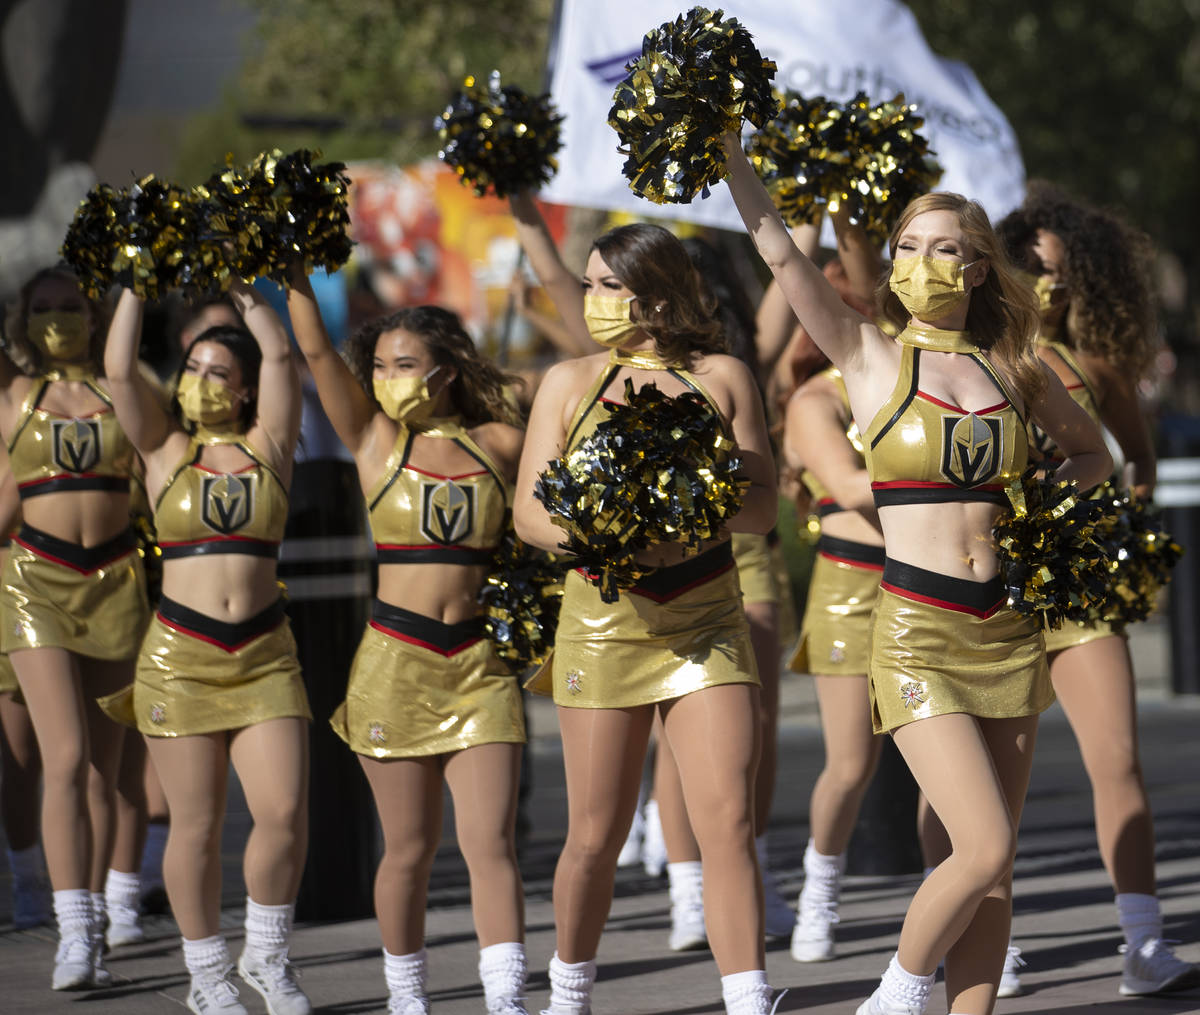 The Golden Aces cheerleaders fire up the crowd outside T-Mobile Arena before the start of Game ...